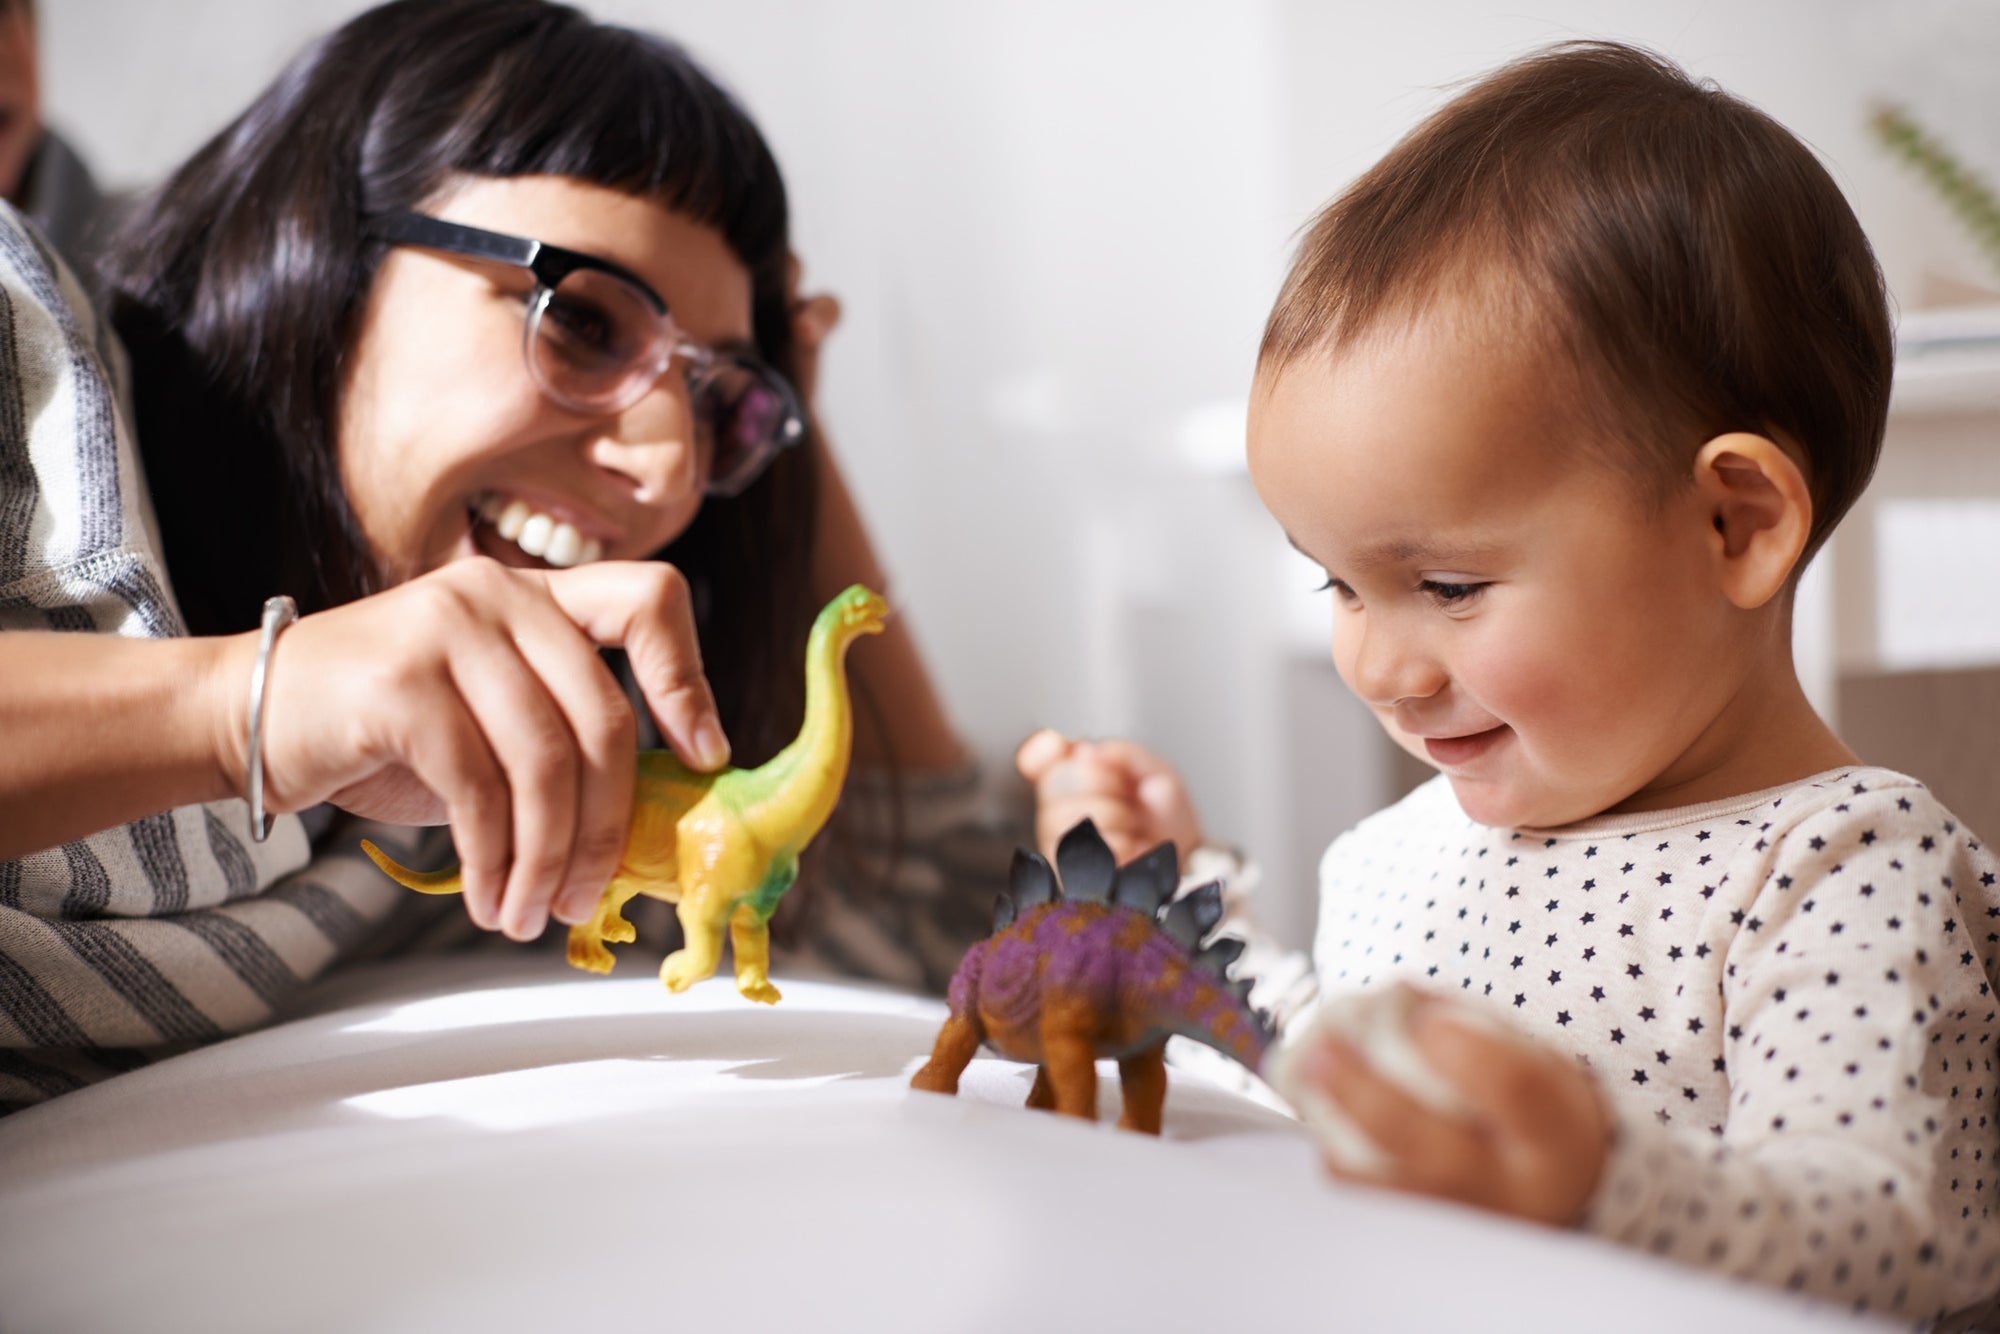 mom and child playing with colorful toy dinosaurs